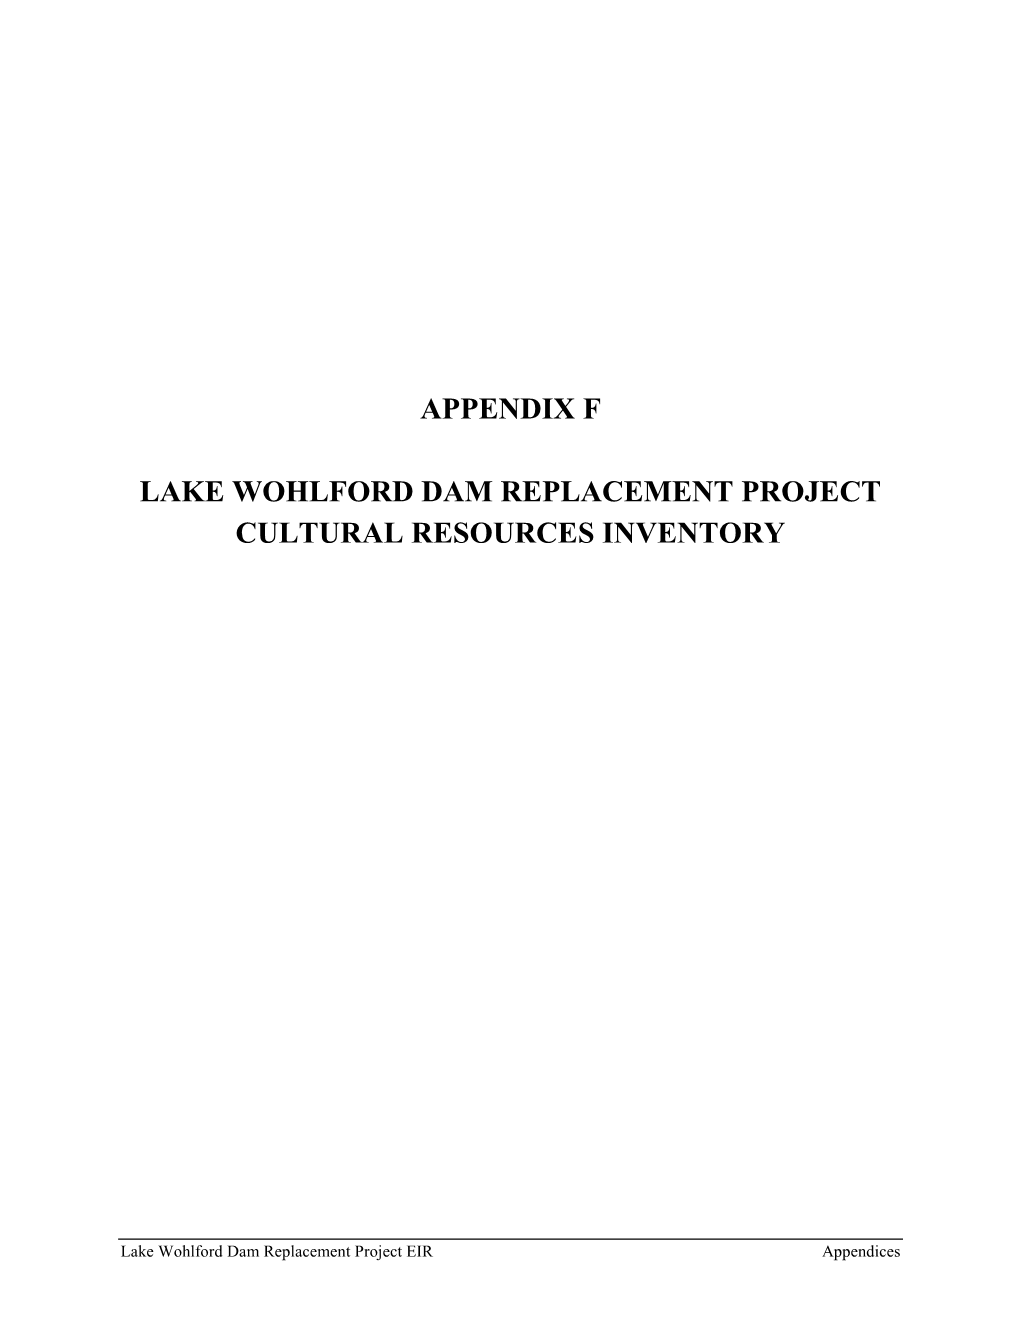 Appendix F Lake Wohlford Dam Replacement Project